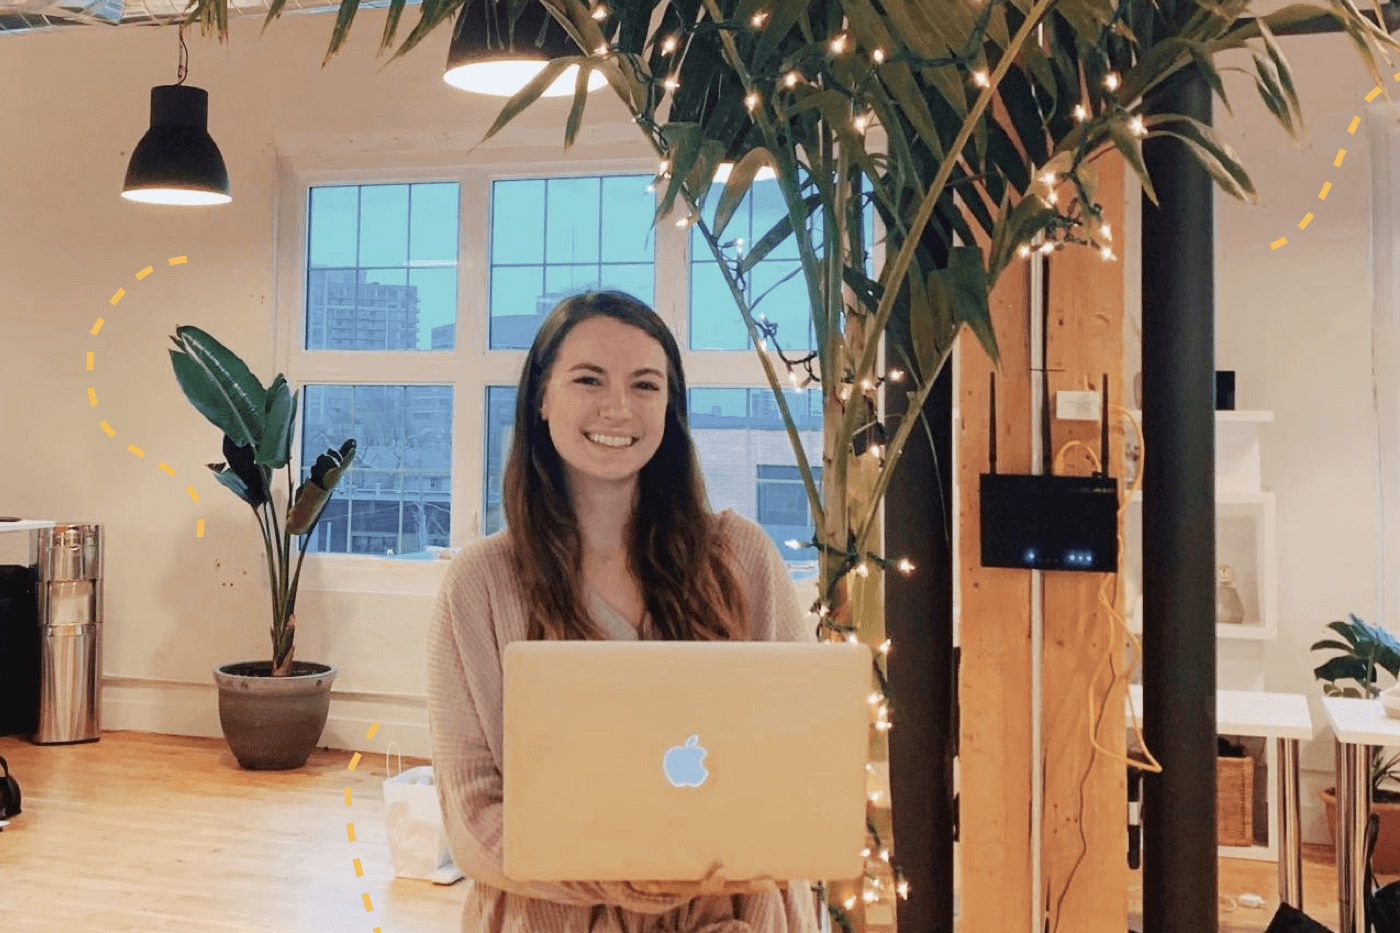 Our New Customer Experience Manager’s First Few Weeks at Hive